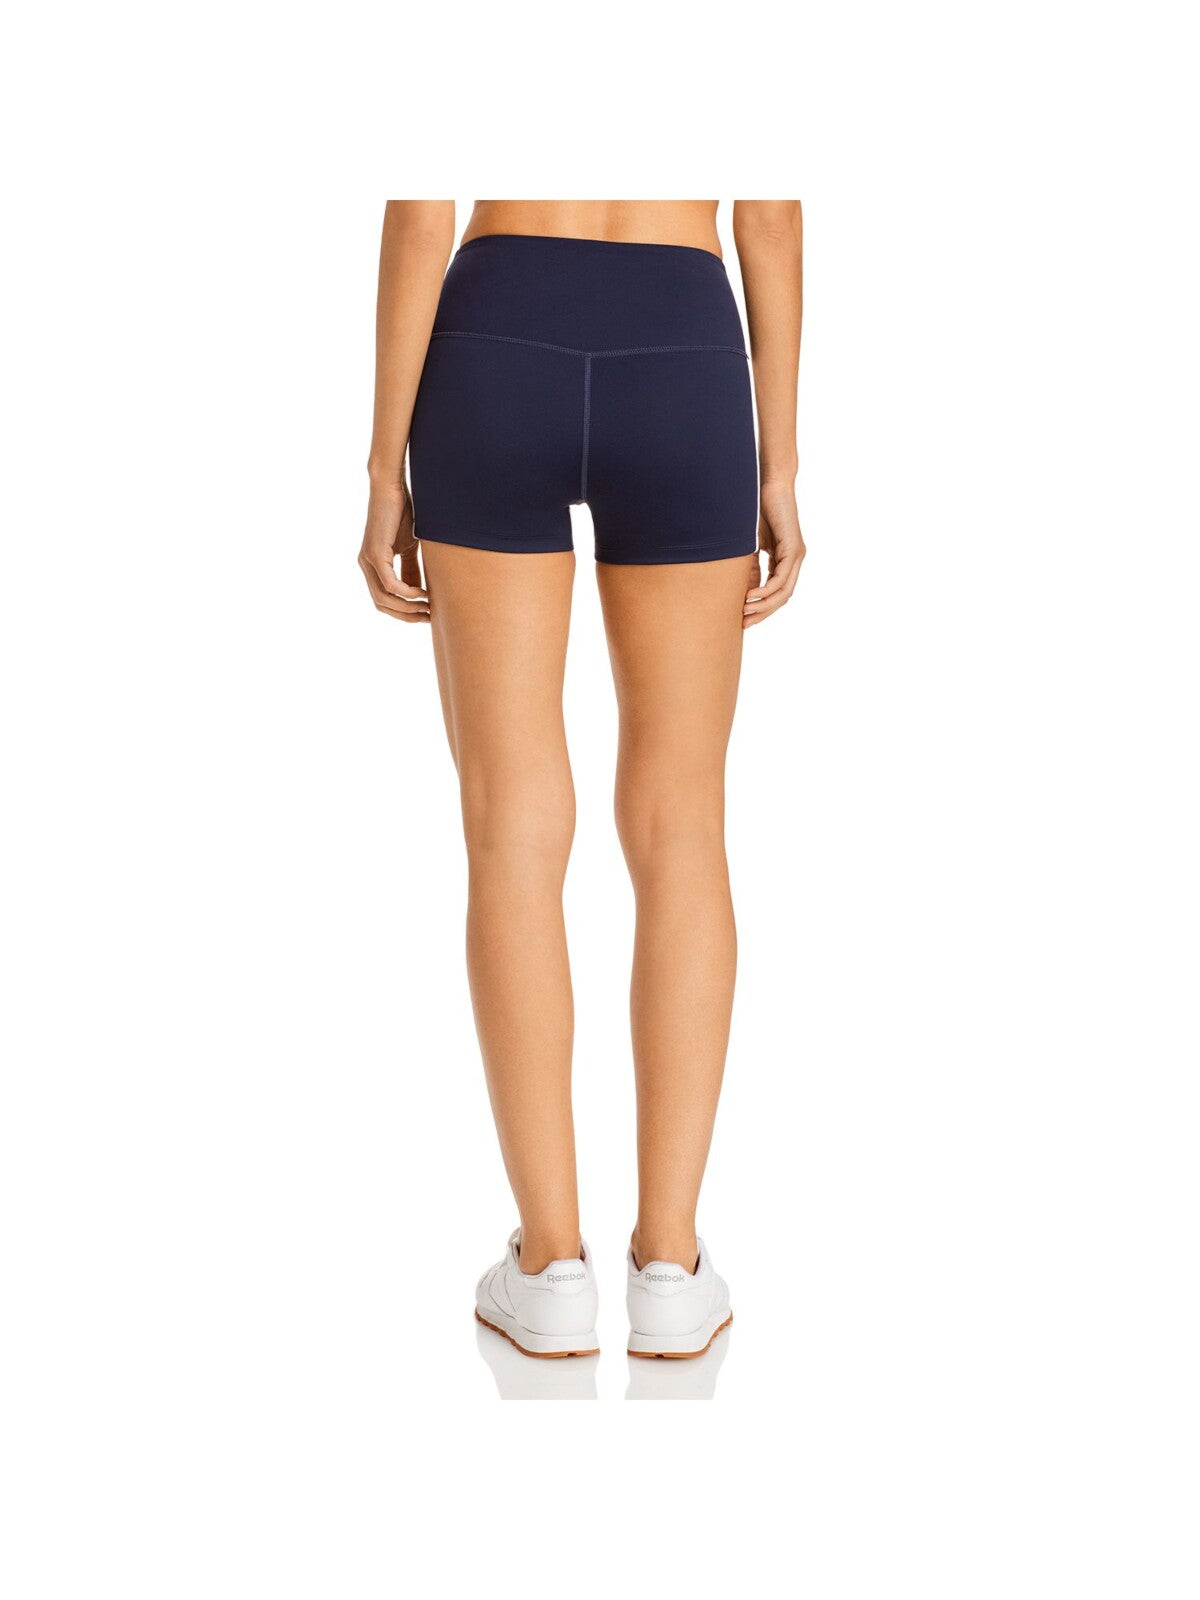 SPLITS 59 Womens Navy Stretch Fitted Regular Rise Shorts XS